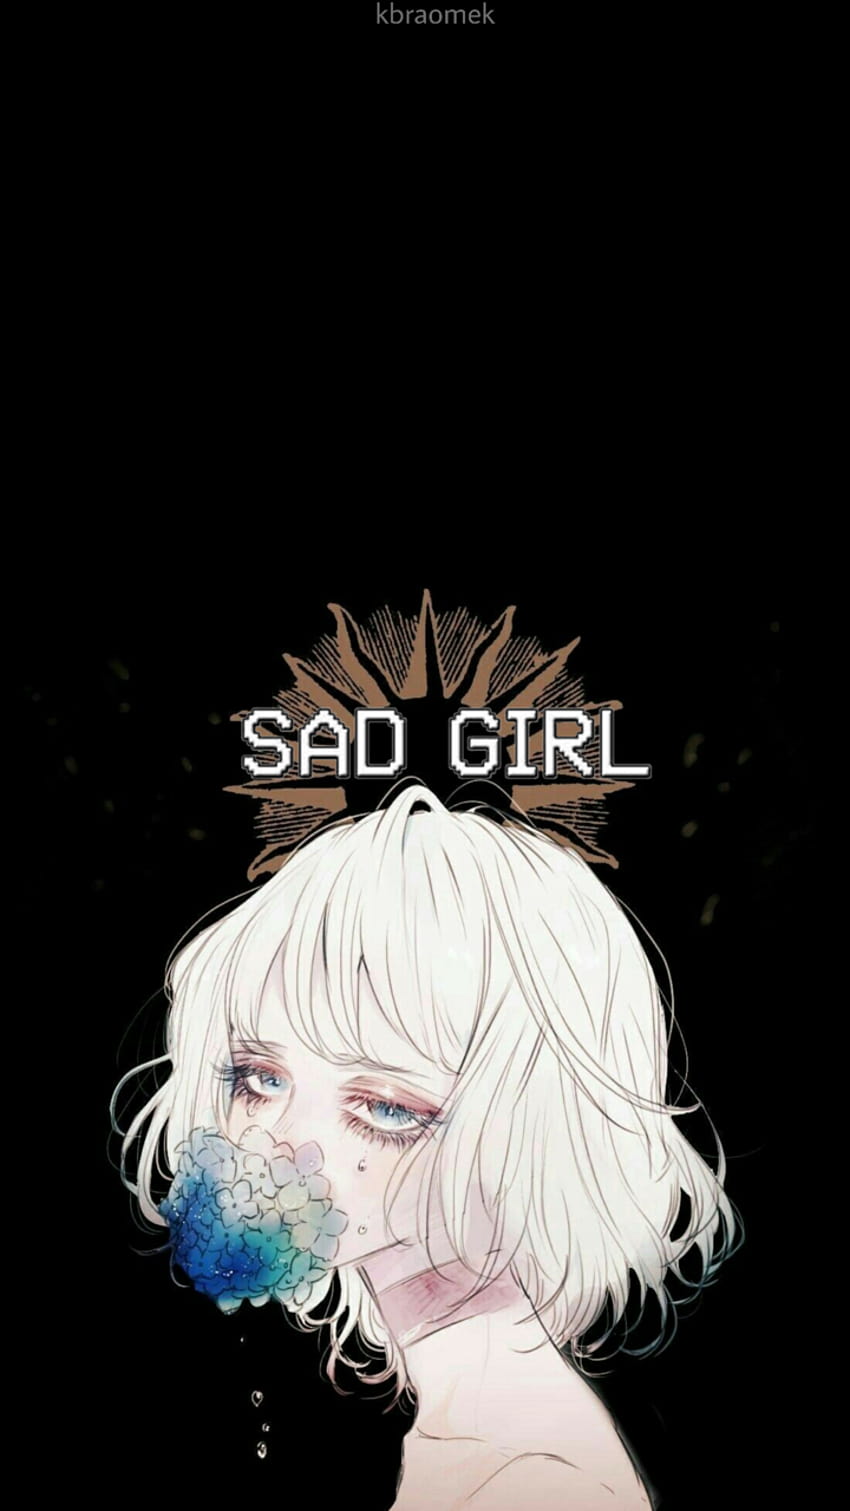 Aesthetic anime wallpaper by MoonPrincess22 - Download on ZEDGE™ | ad5e